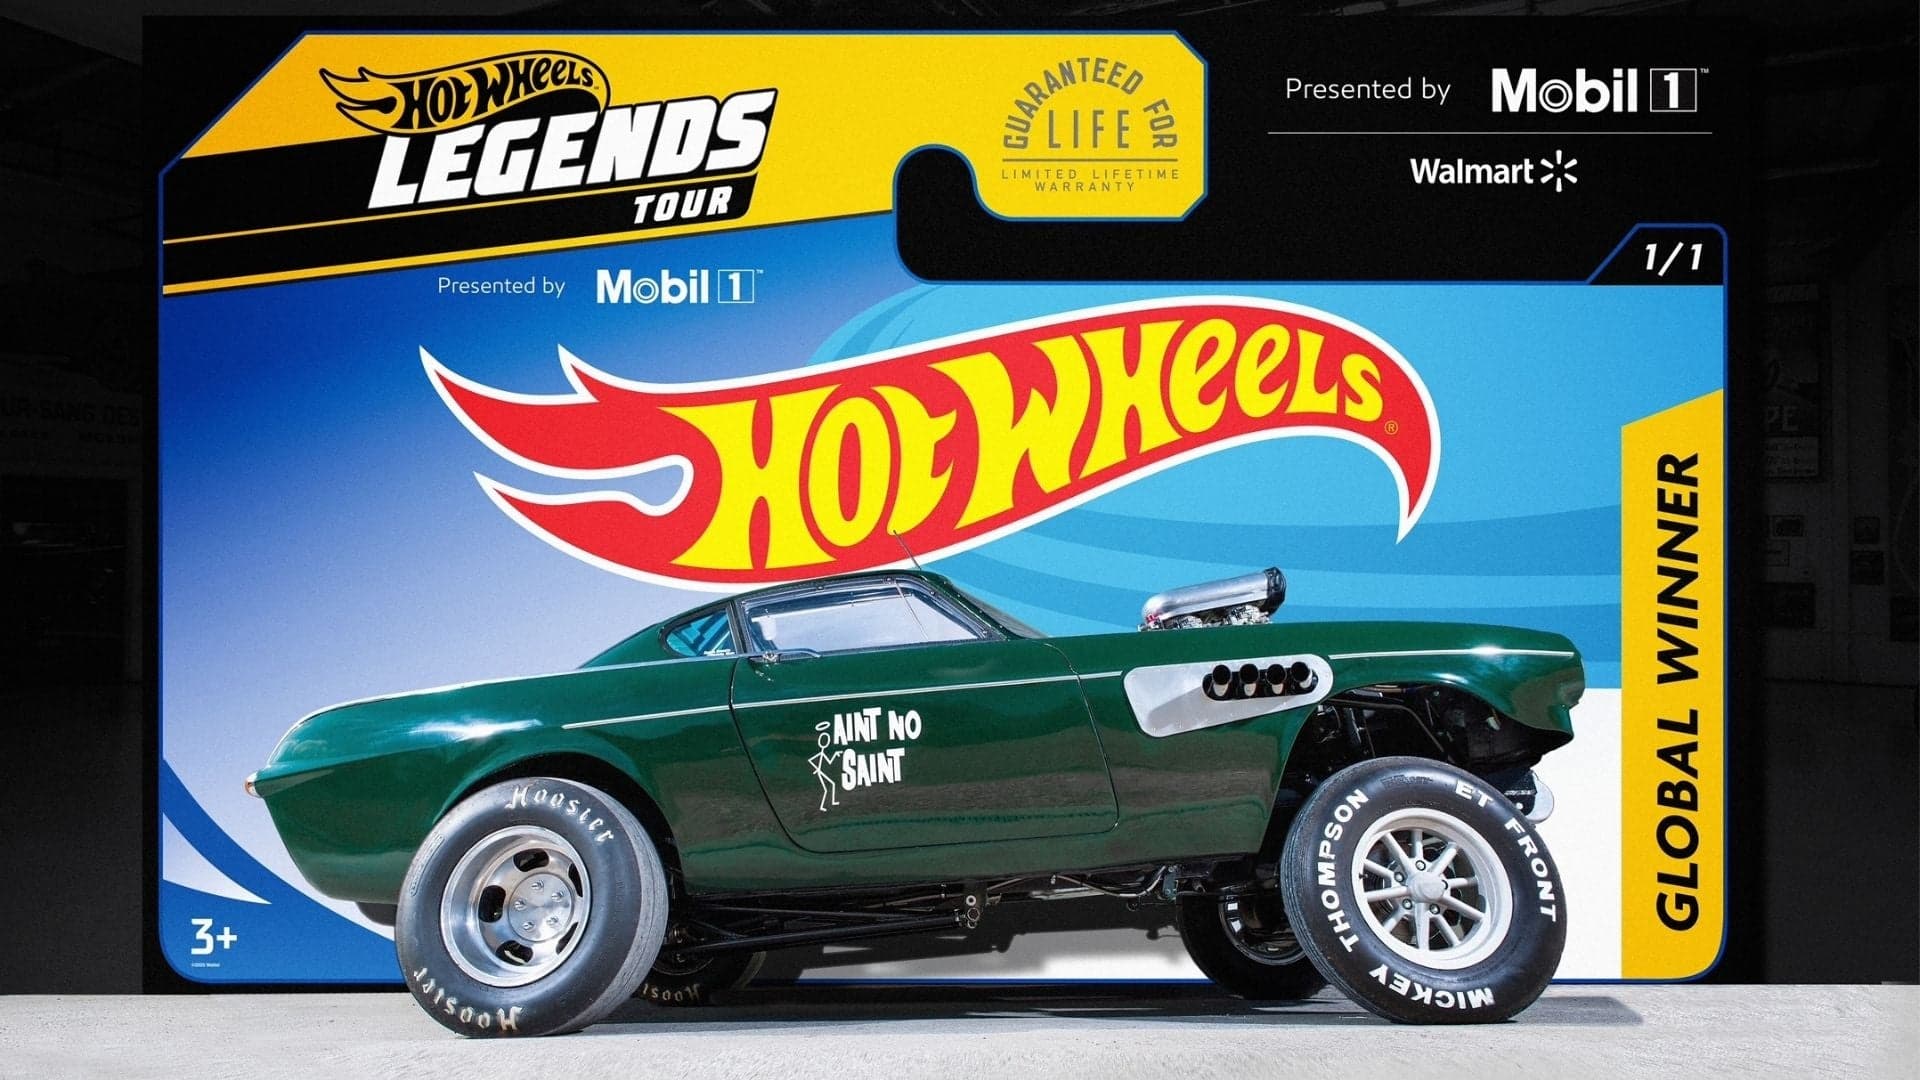 A 10-Second 1969 Volvo Gasser Won This Year’s Hot Wheels Legends Tour